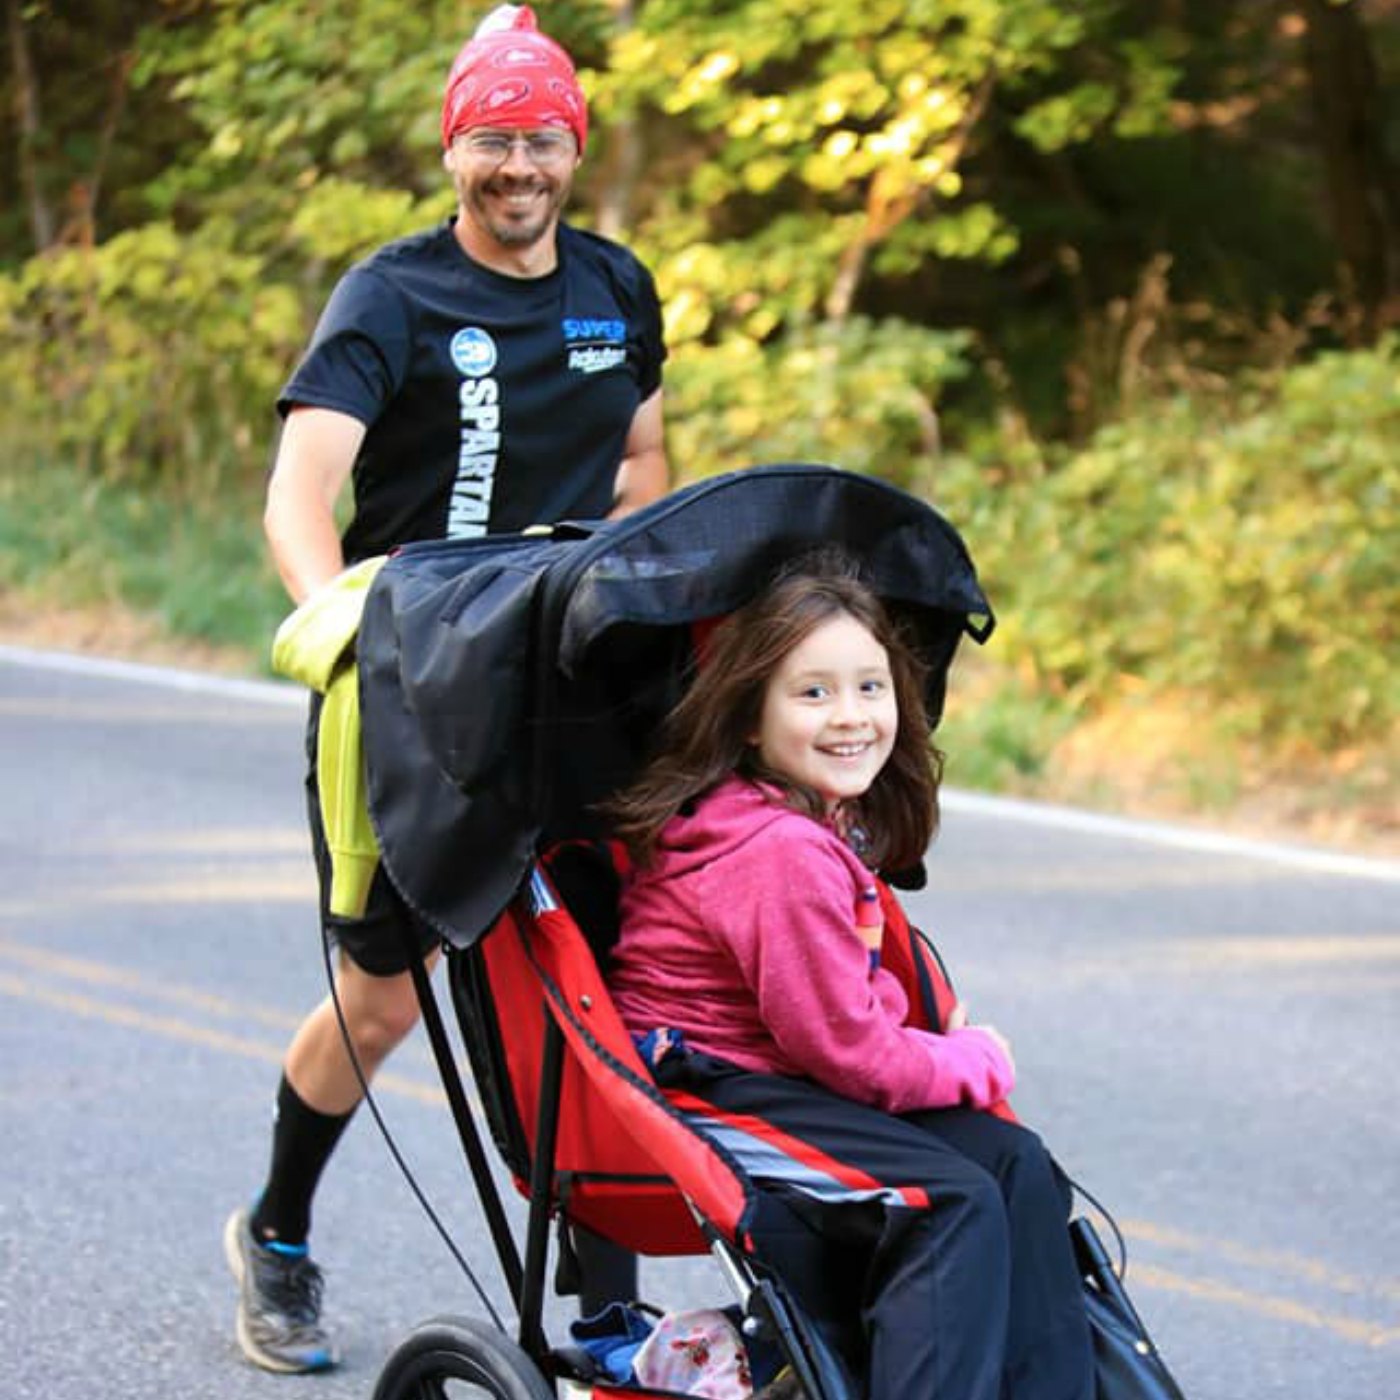 On The Run With Chris: My Inspiration, Becoming a Pacer, and a Special Running Stroller